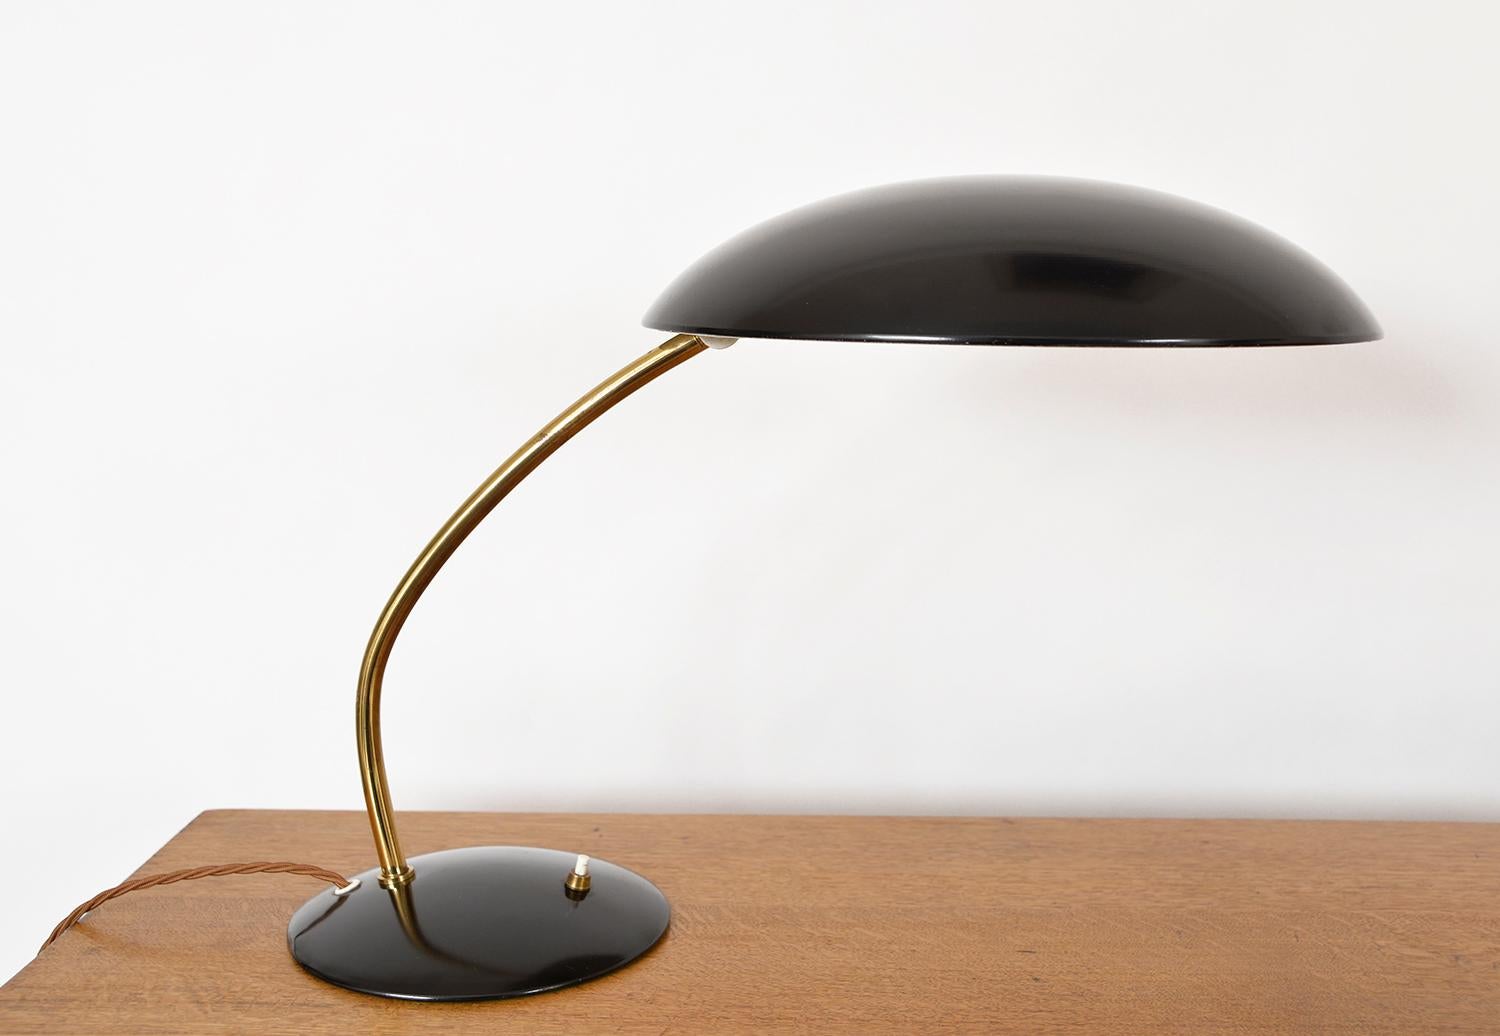 Original 1950s black enameled Kaiser Idell desk lamp by Christian Dell, model ‘6782’ with a curved pivoting brass arm and ball joint mechanism, which allows the shade to be rotated and tilted.
This timeless desk lamp, sat on green baize, is in very